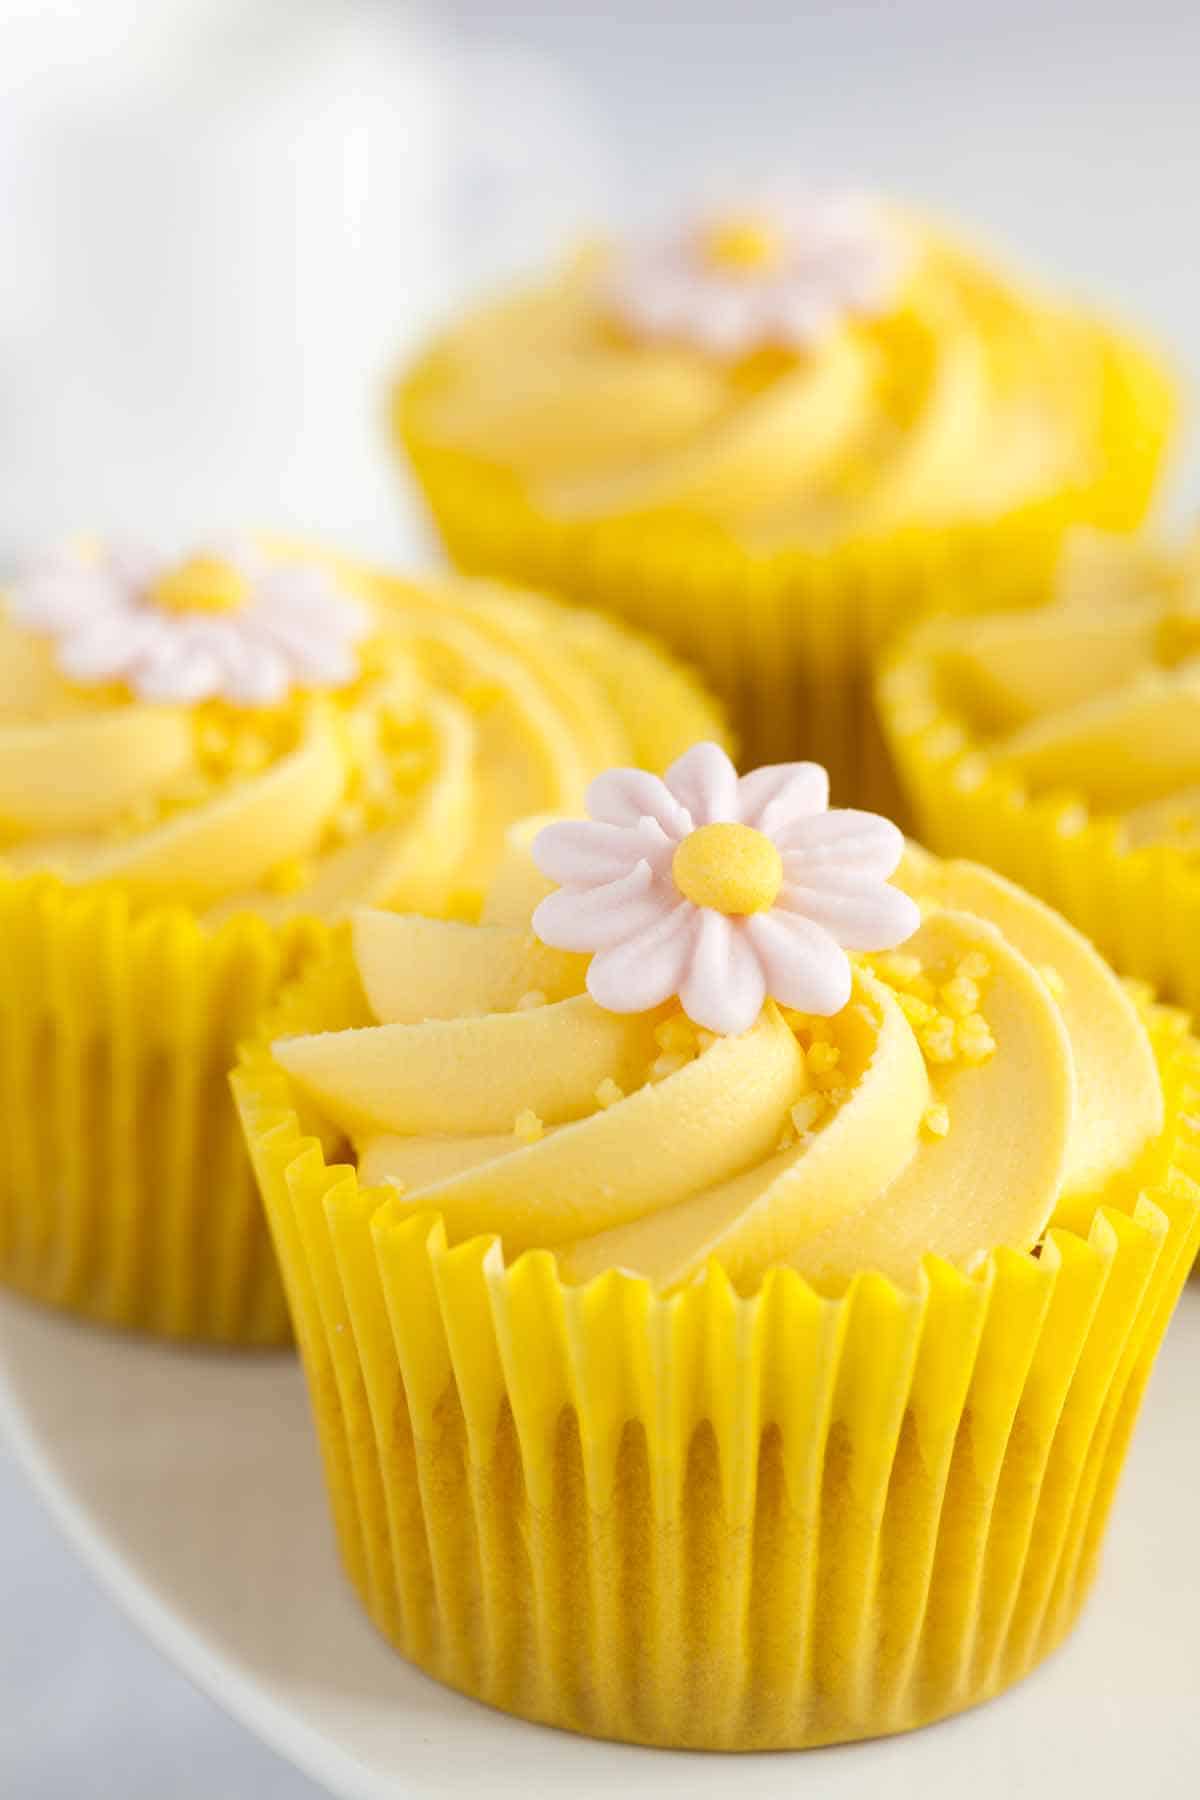 Lemon cupcakes filled and topped with lemon buttercream frosting. Each cupcake has a decorative flower on top.